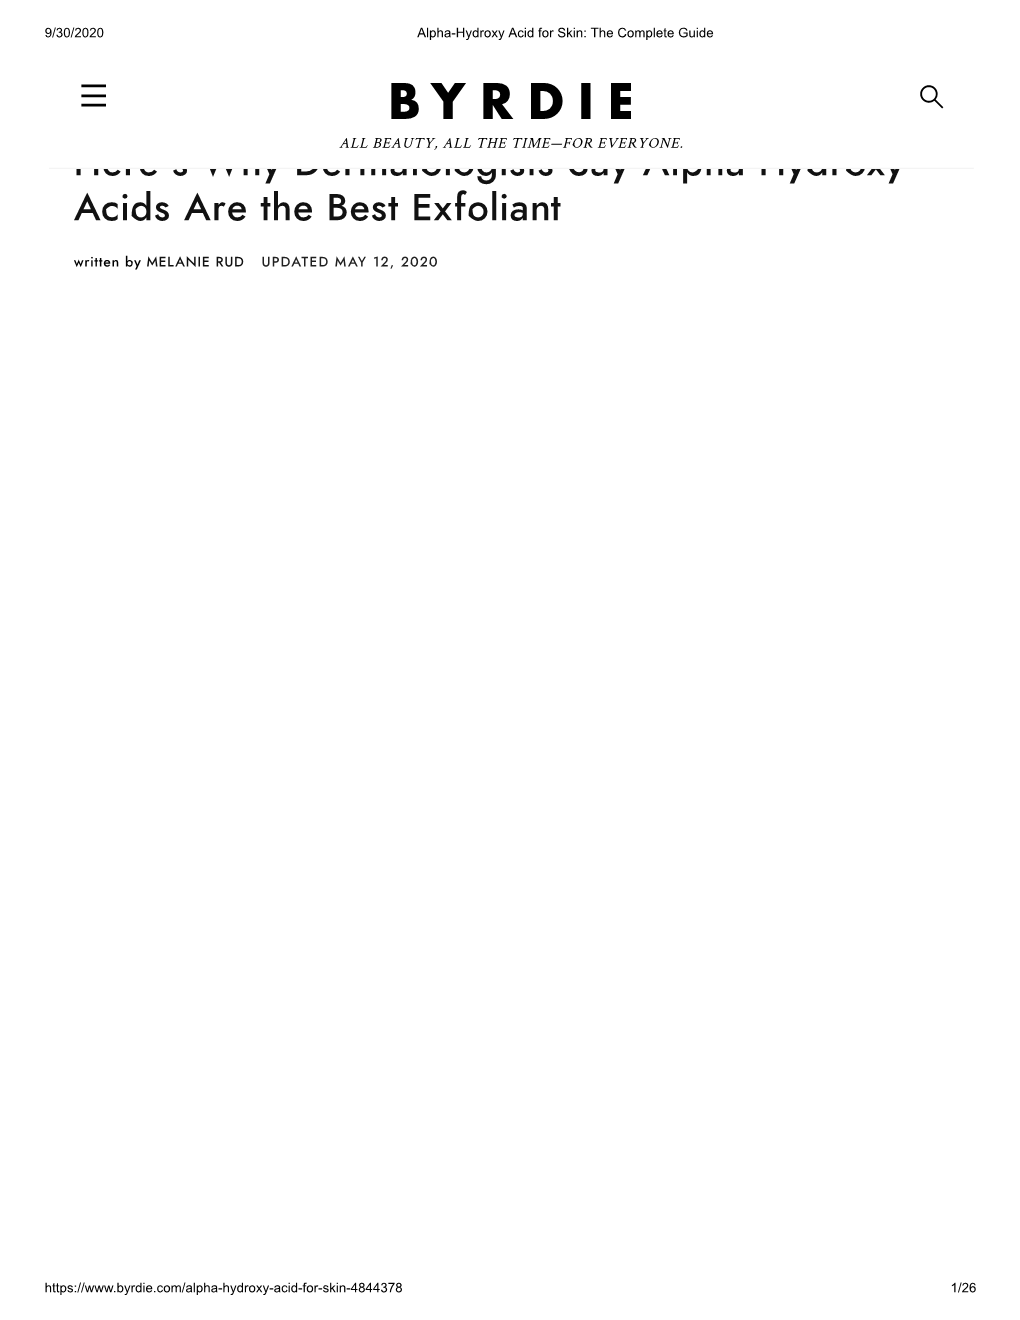 Alpha-Hydroxy Acid for Skin the Complete Guide.Pdf